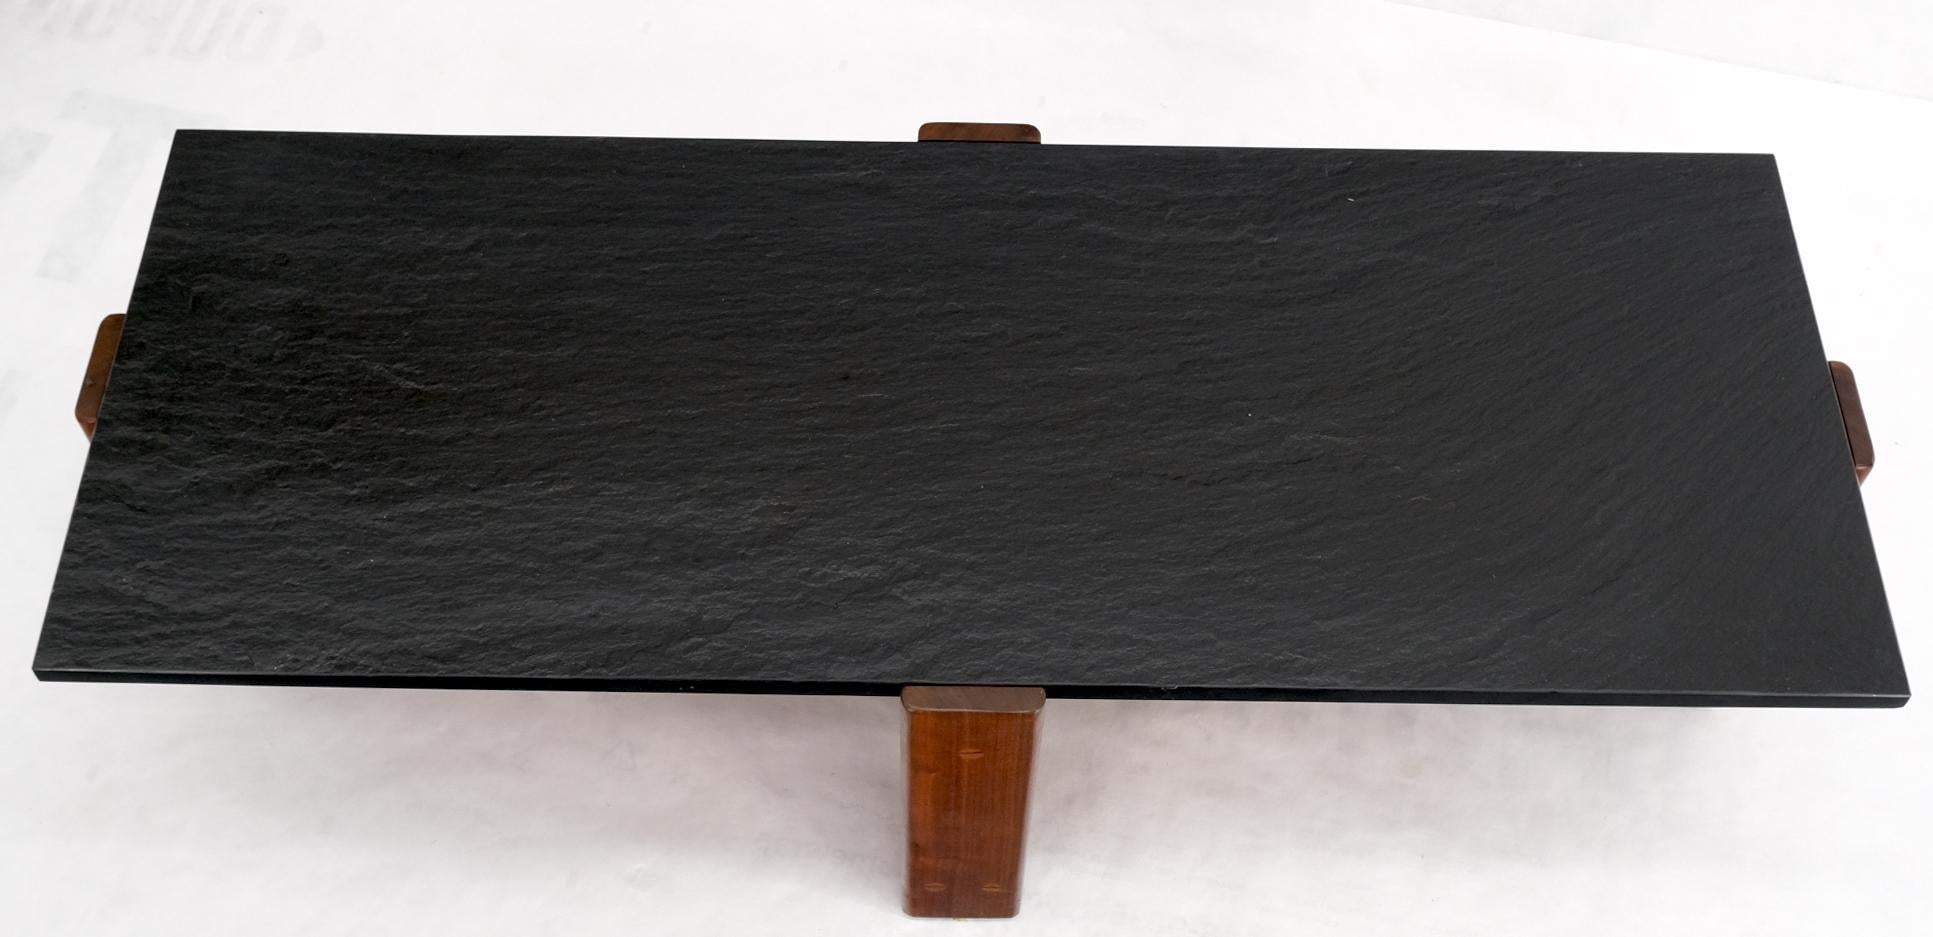 High quality craftsmanship slate top solid oiled walnut base coffee table signed and dated 1972.